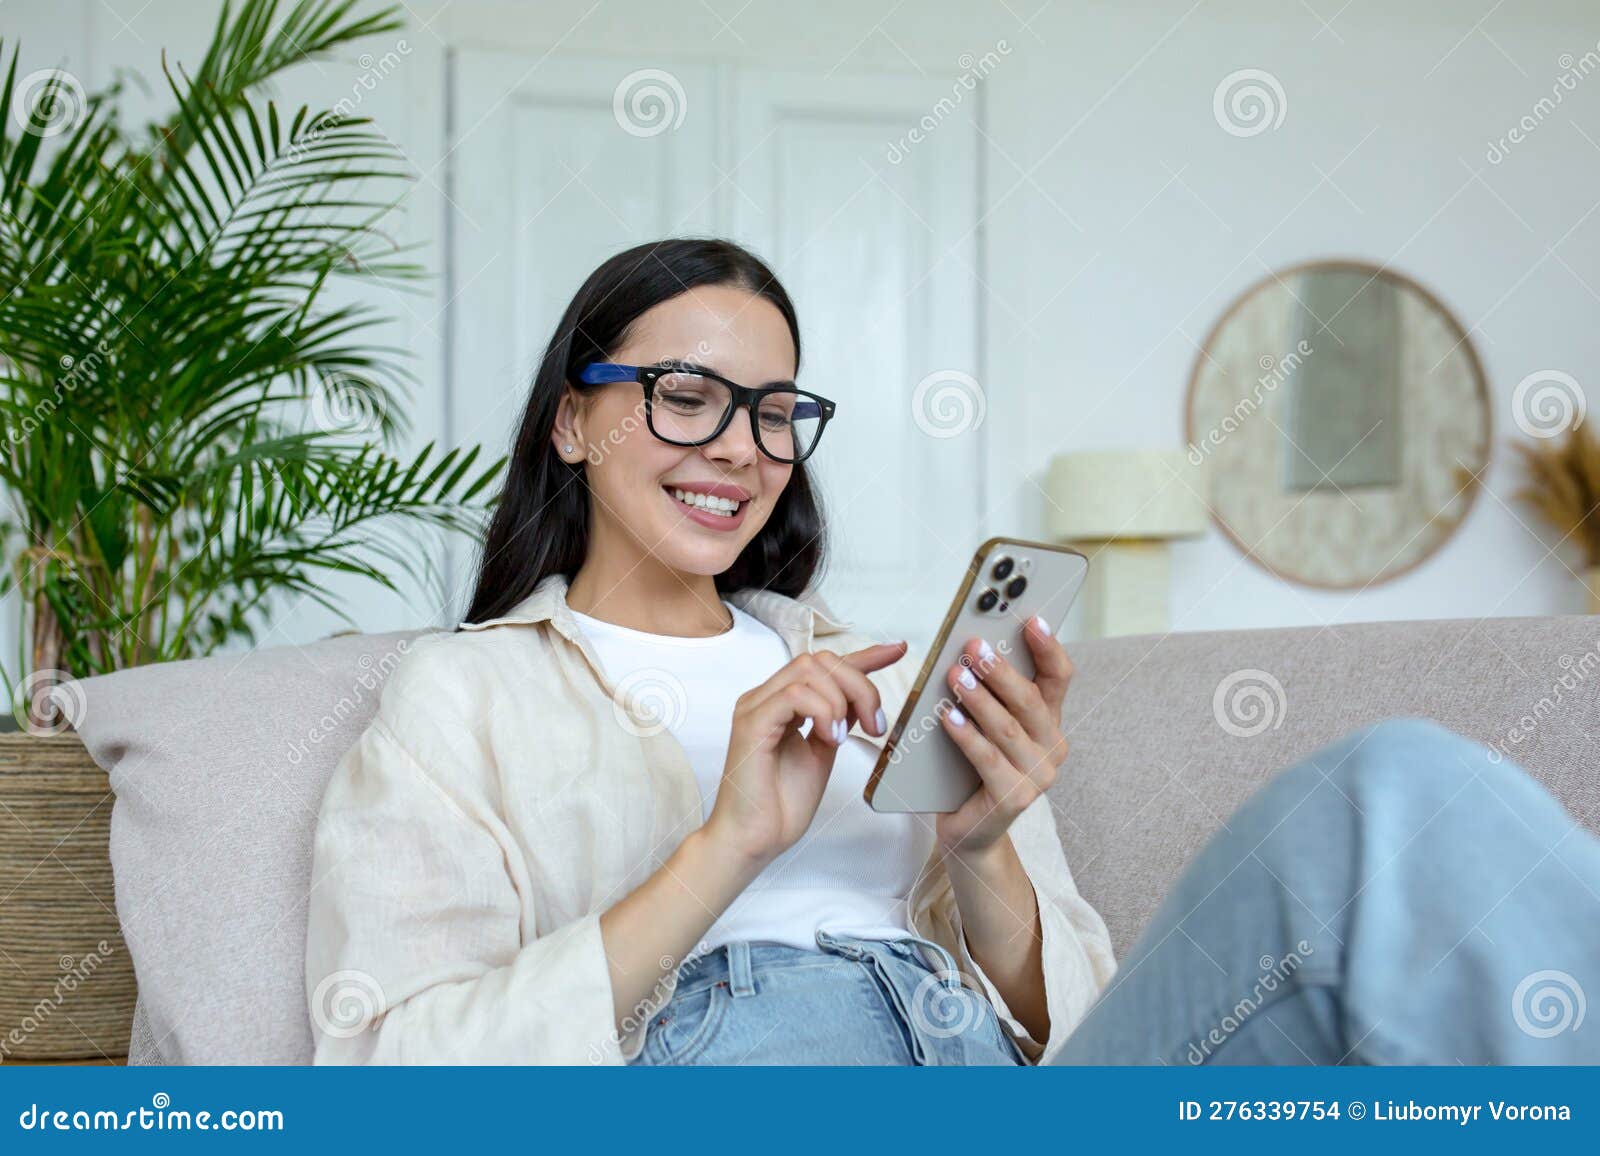 a young woman is lying on the sofa at home and smilingly using a mobile phone